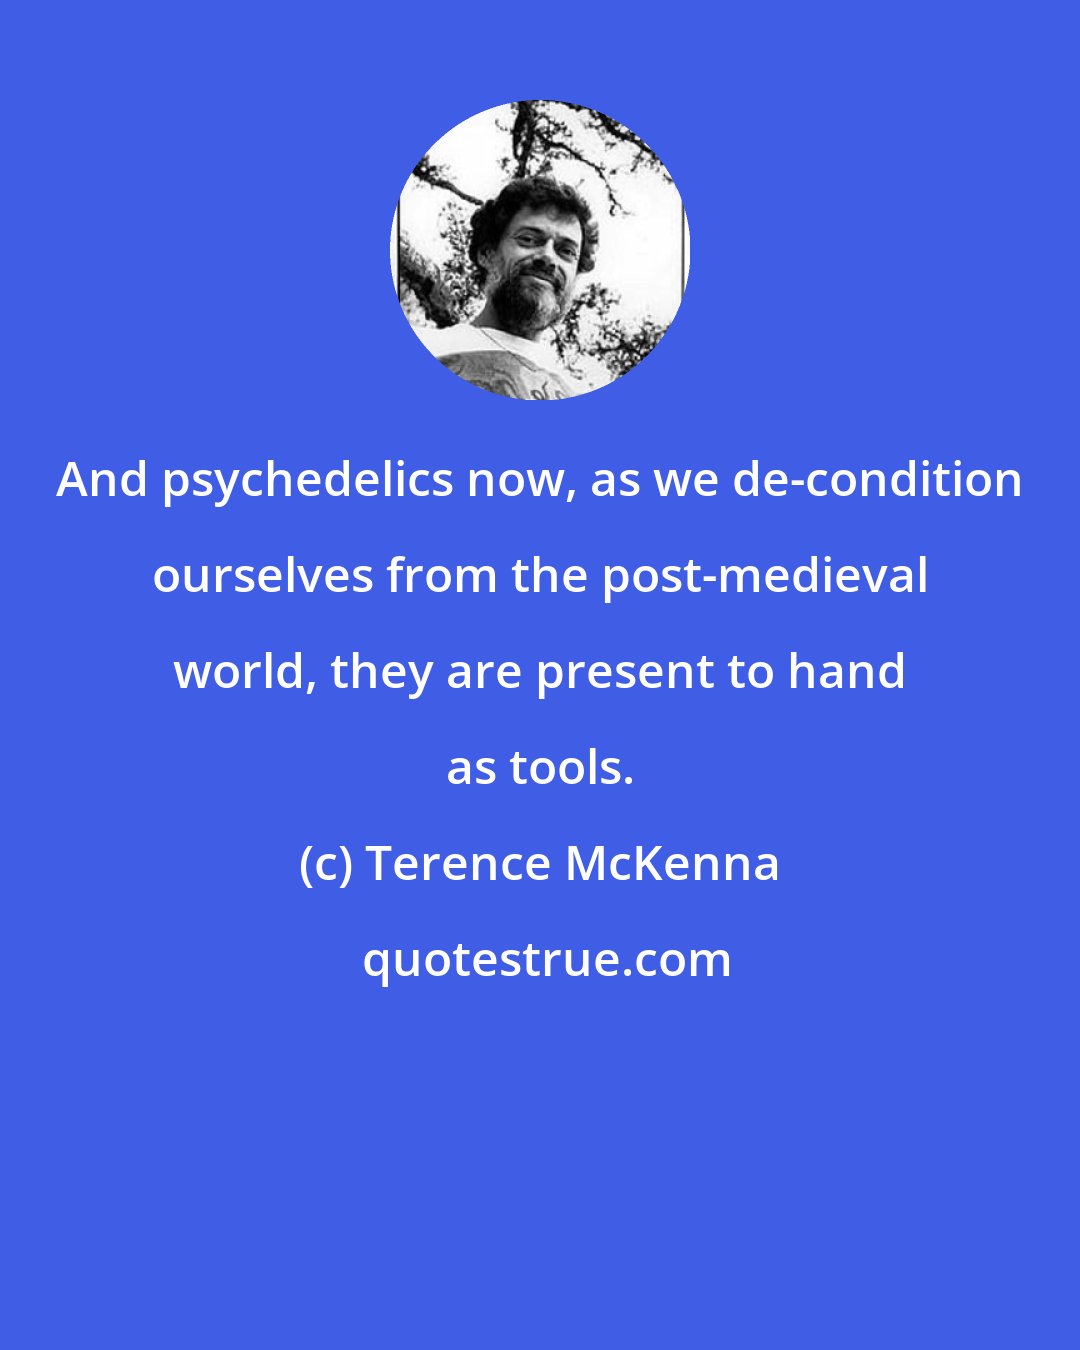 Terence McKenna: And psychedelics now, as we de-condition ourselves from the post-medieval world, they are present to hand as tools.